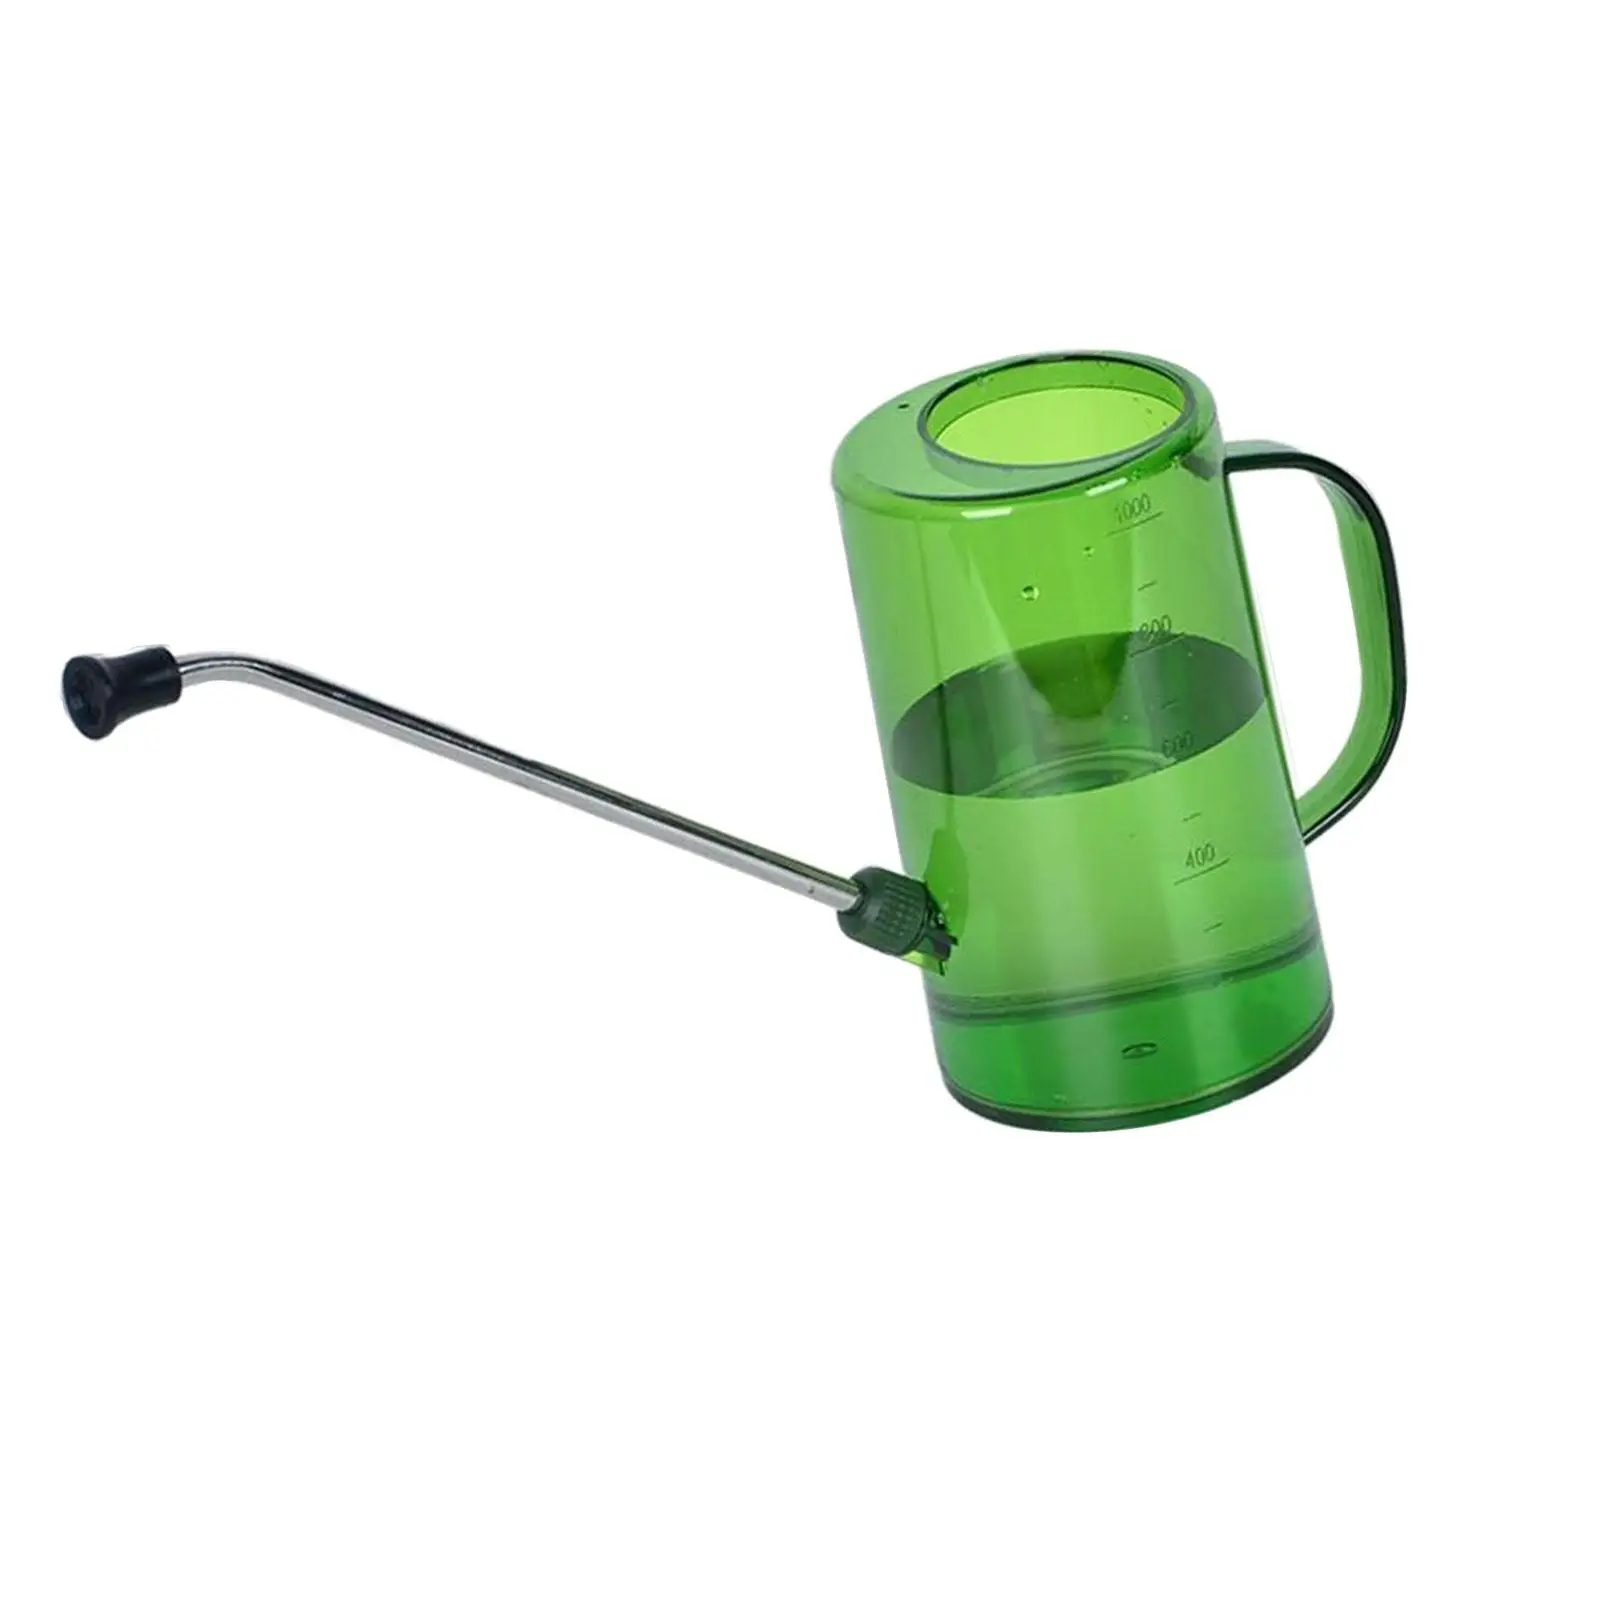 1000ml Long Spout Watering Pot with Detachable Spray Head Small Watering Can for Outdoor Garden Lawn Yard Flowers